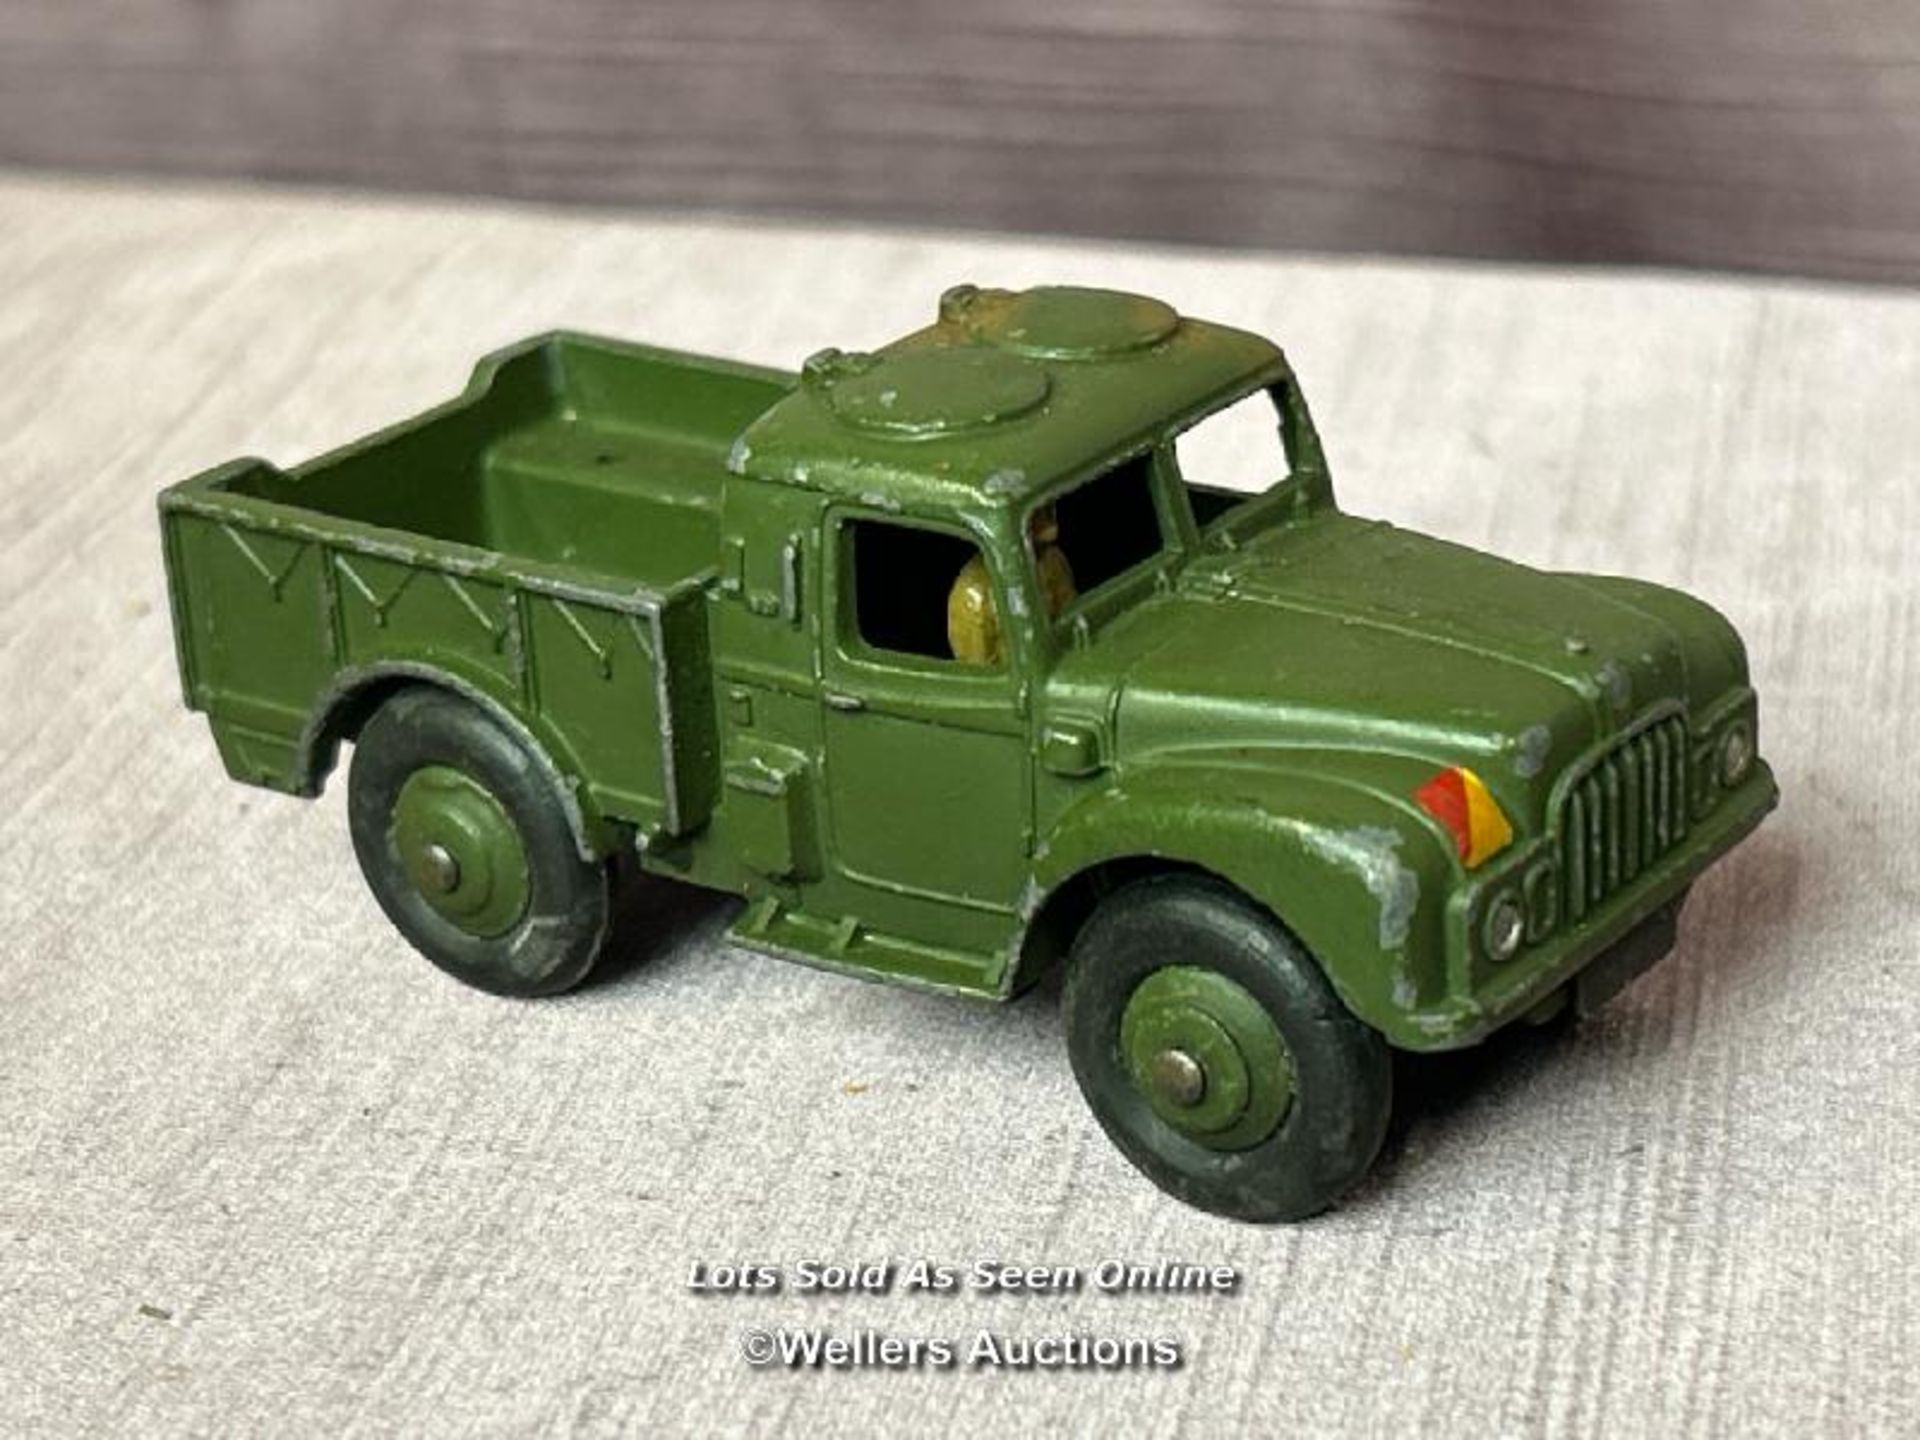 TWO DINKY DIE CAST MILITARY MODELS INCLUDING ONE TONNE CARGO TRUCK NO. 614 AND A MOBILE CANNON - Bild 2 aus 5